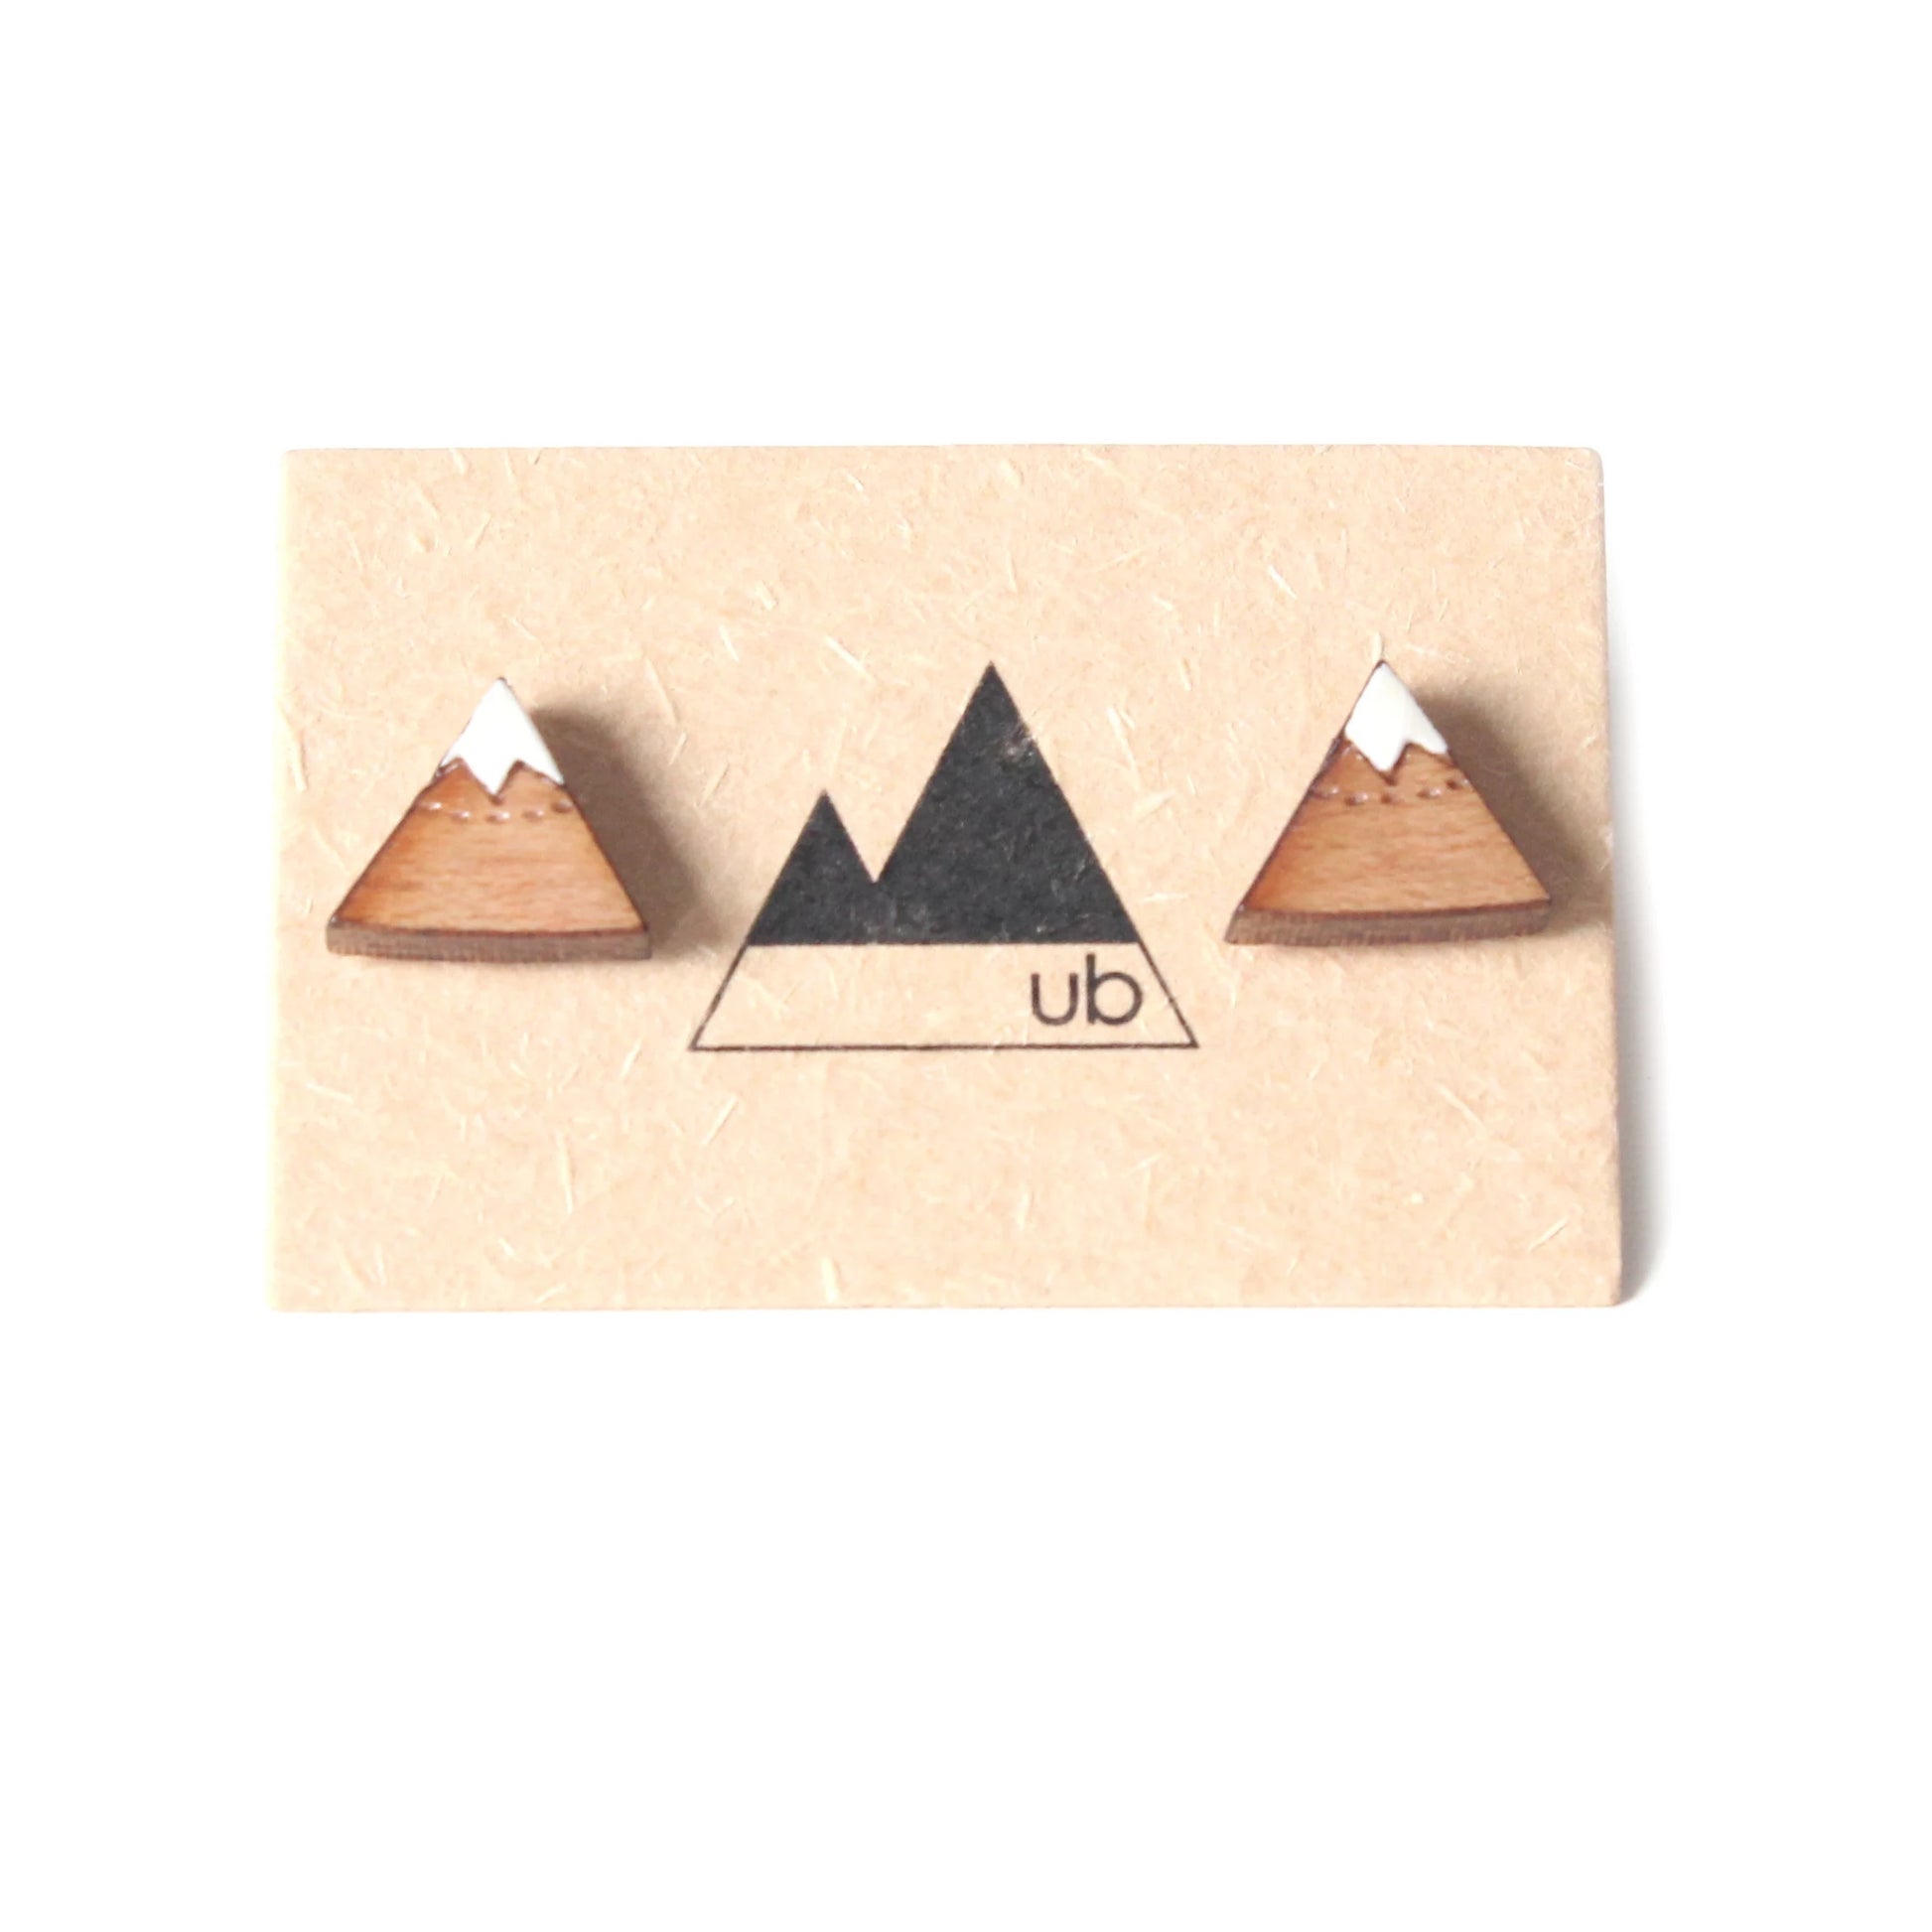 Made in Canada wooden snow capped mountain stud earrings.